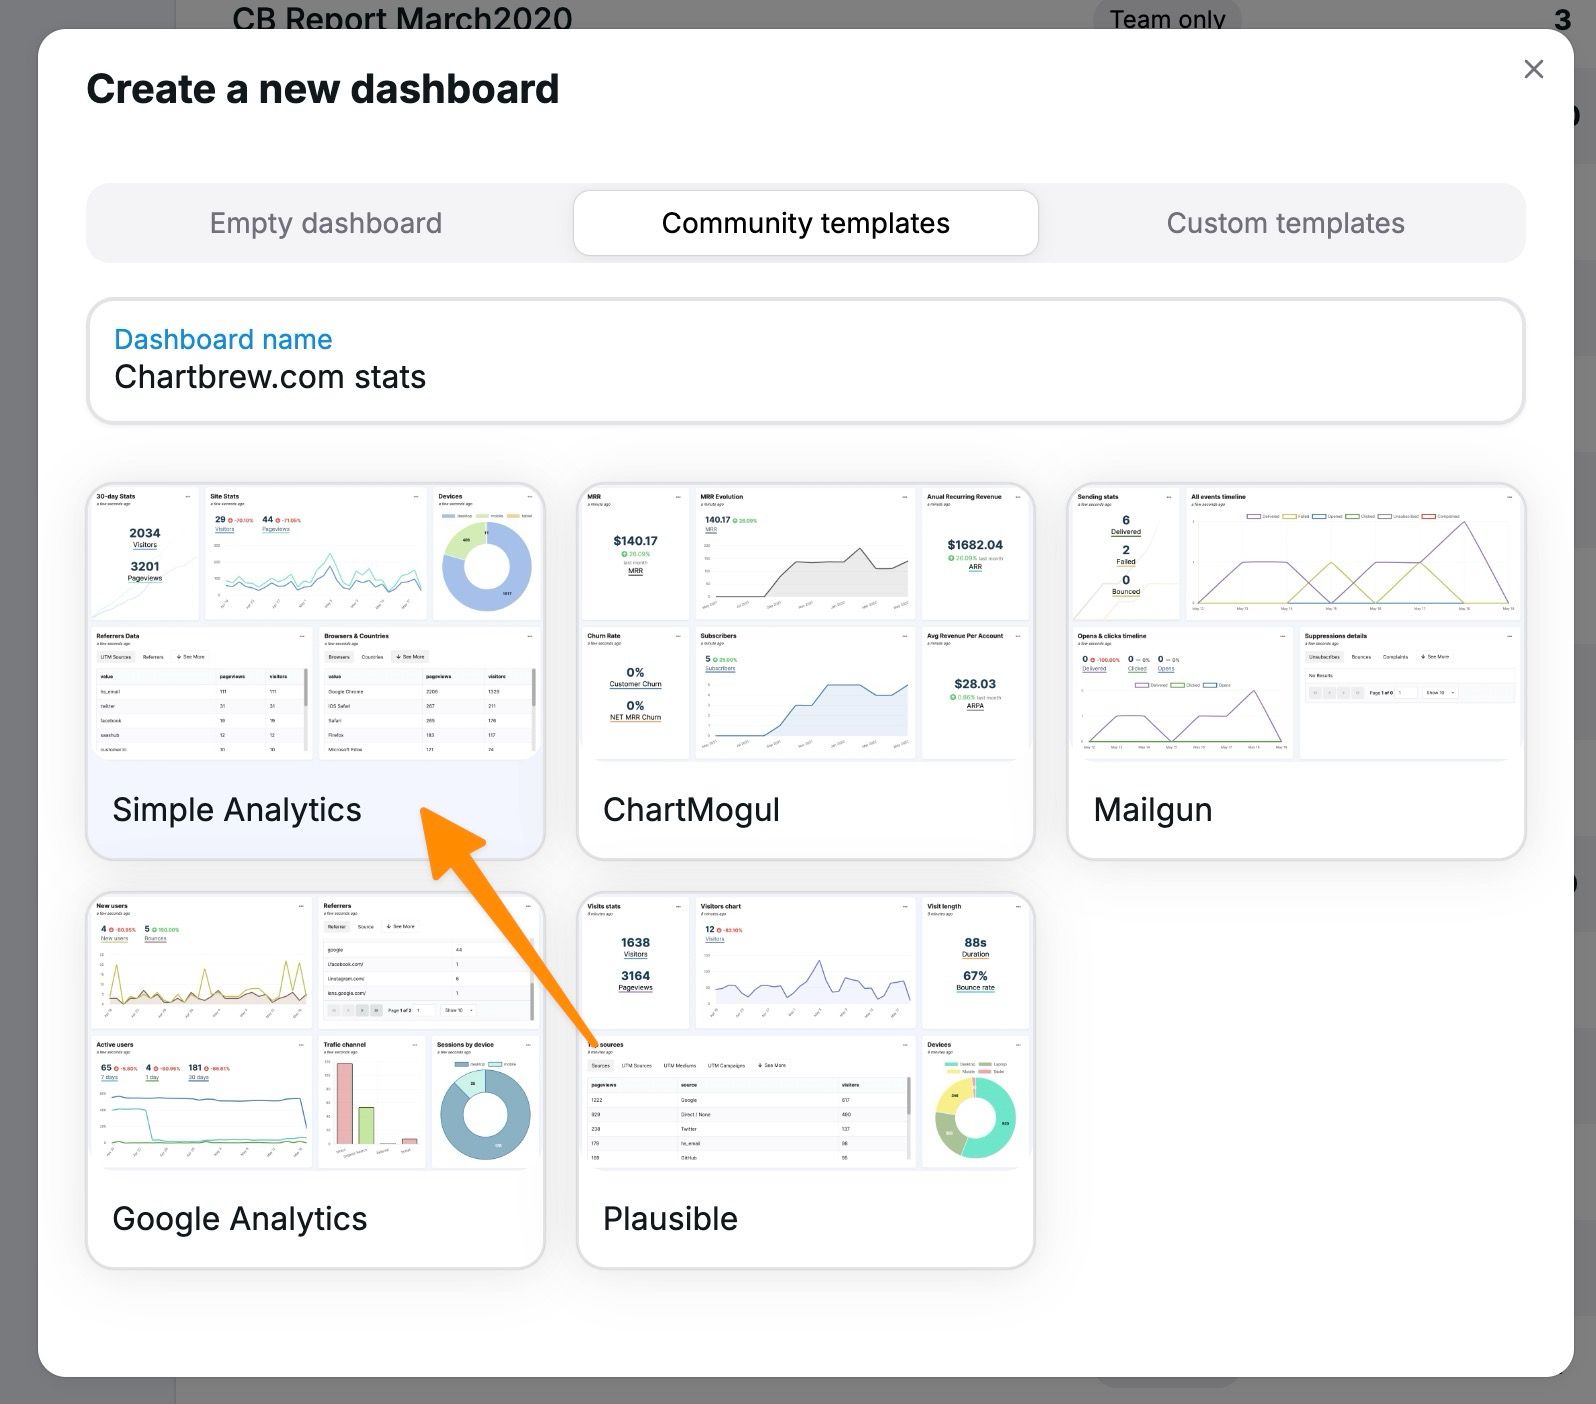 Creating a new dashboard in Chartbrew